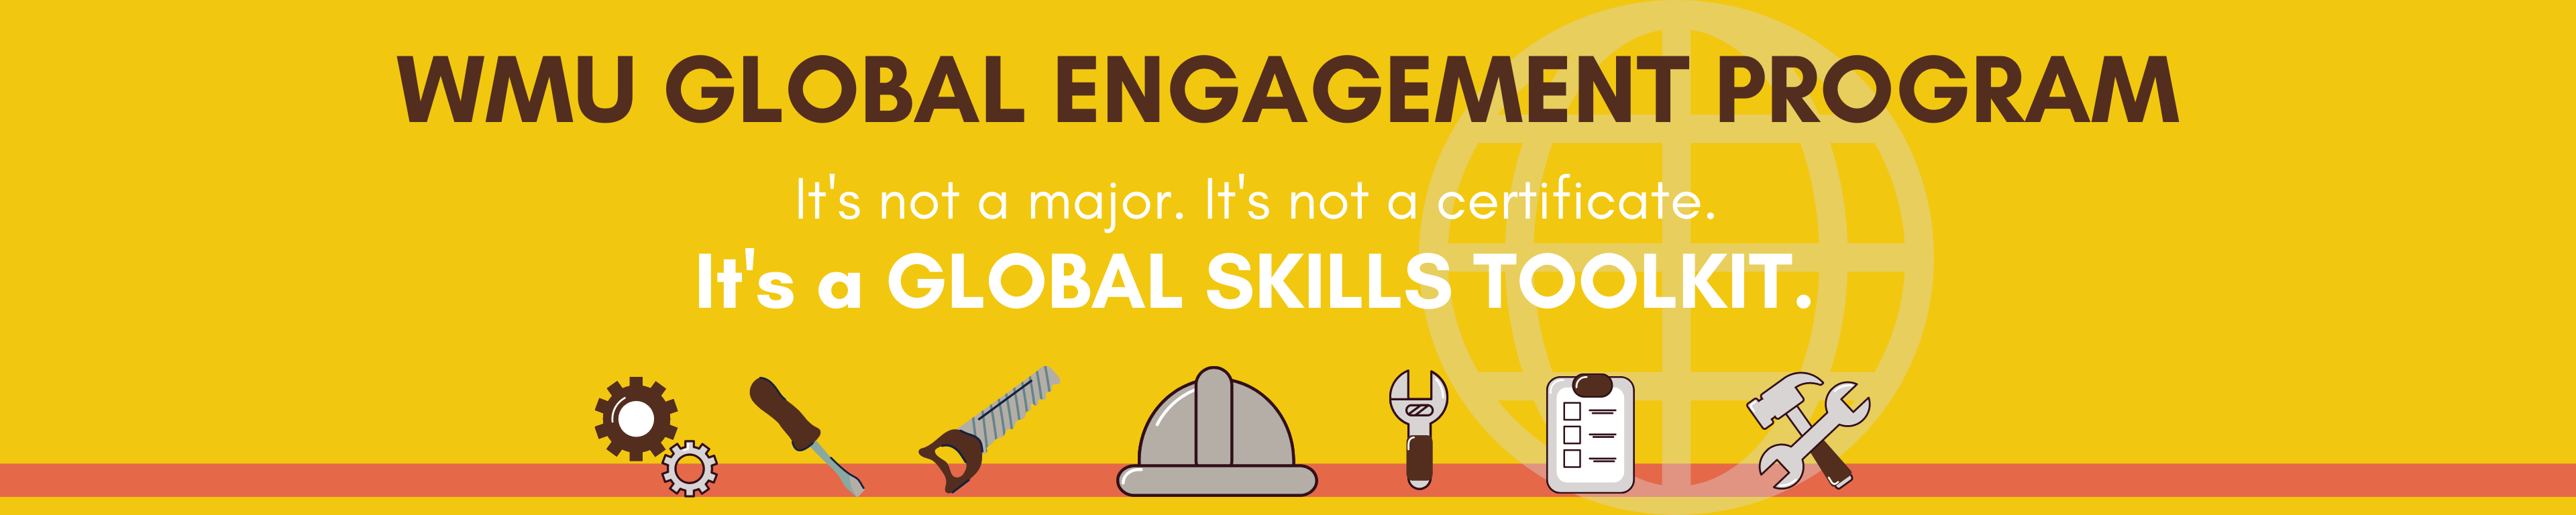 It's not a major. It's not a certificate. It's a global skills toolkit. [icons of tools] Sign up for Year 1 today!